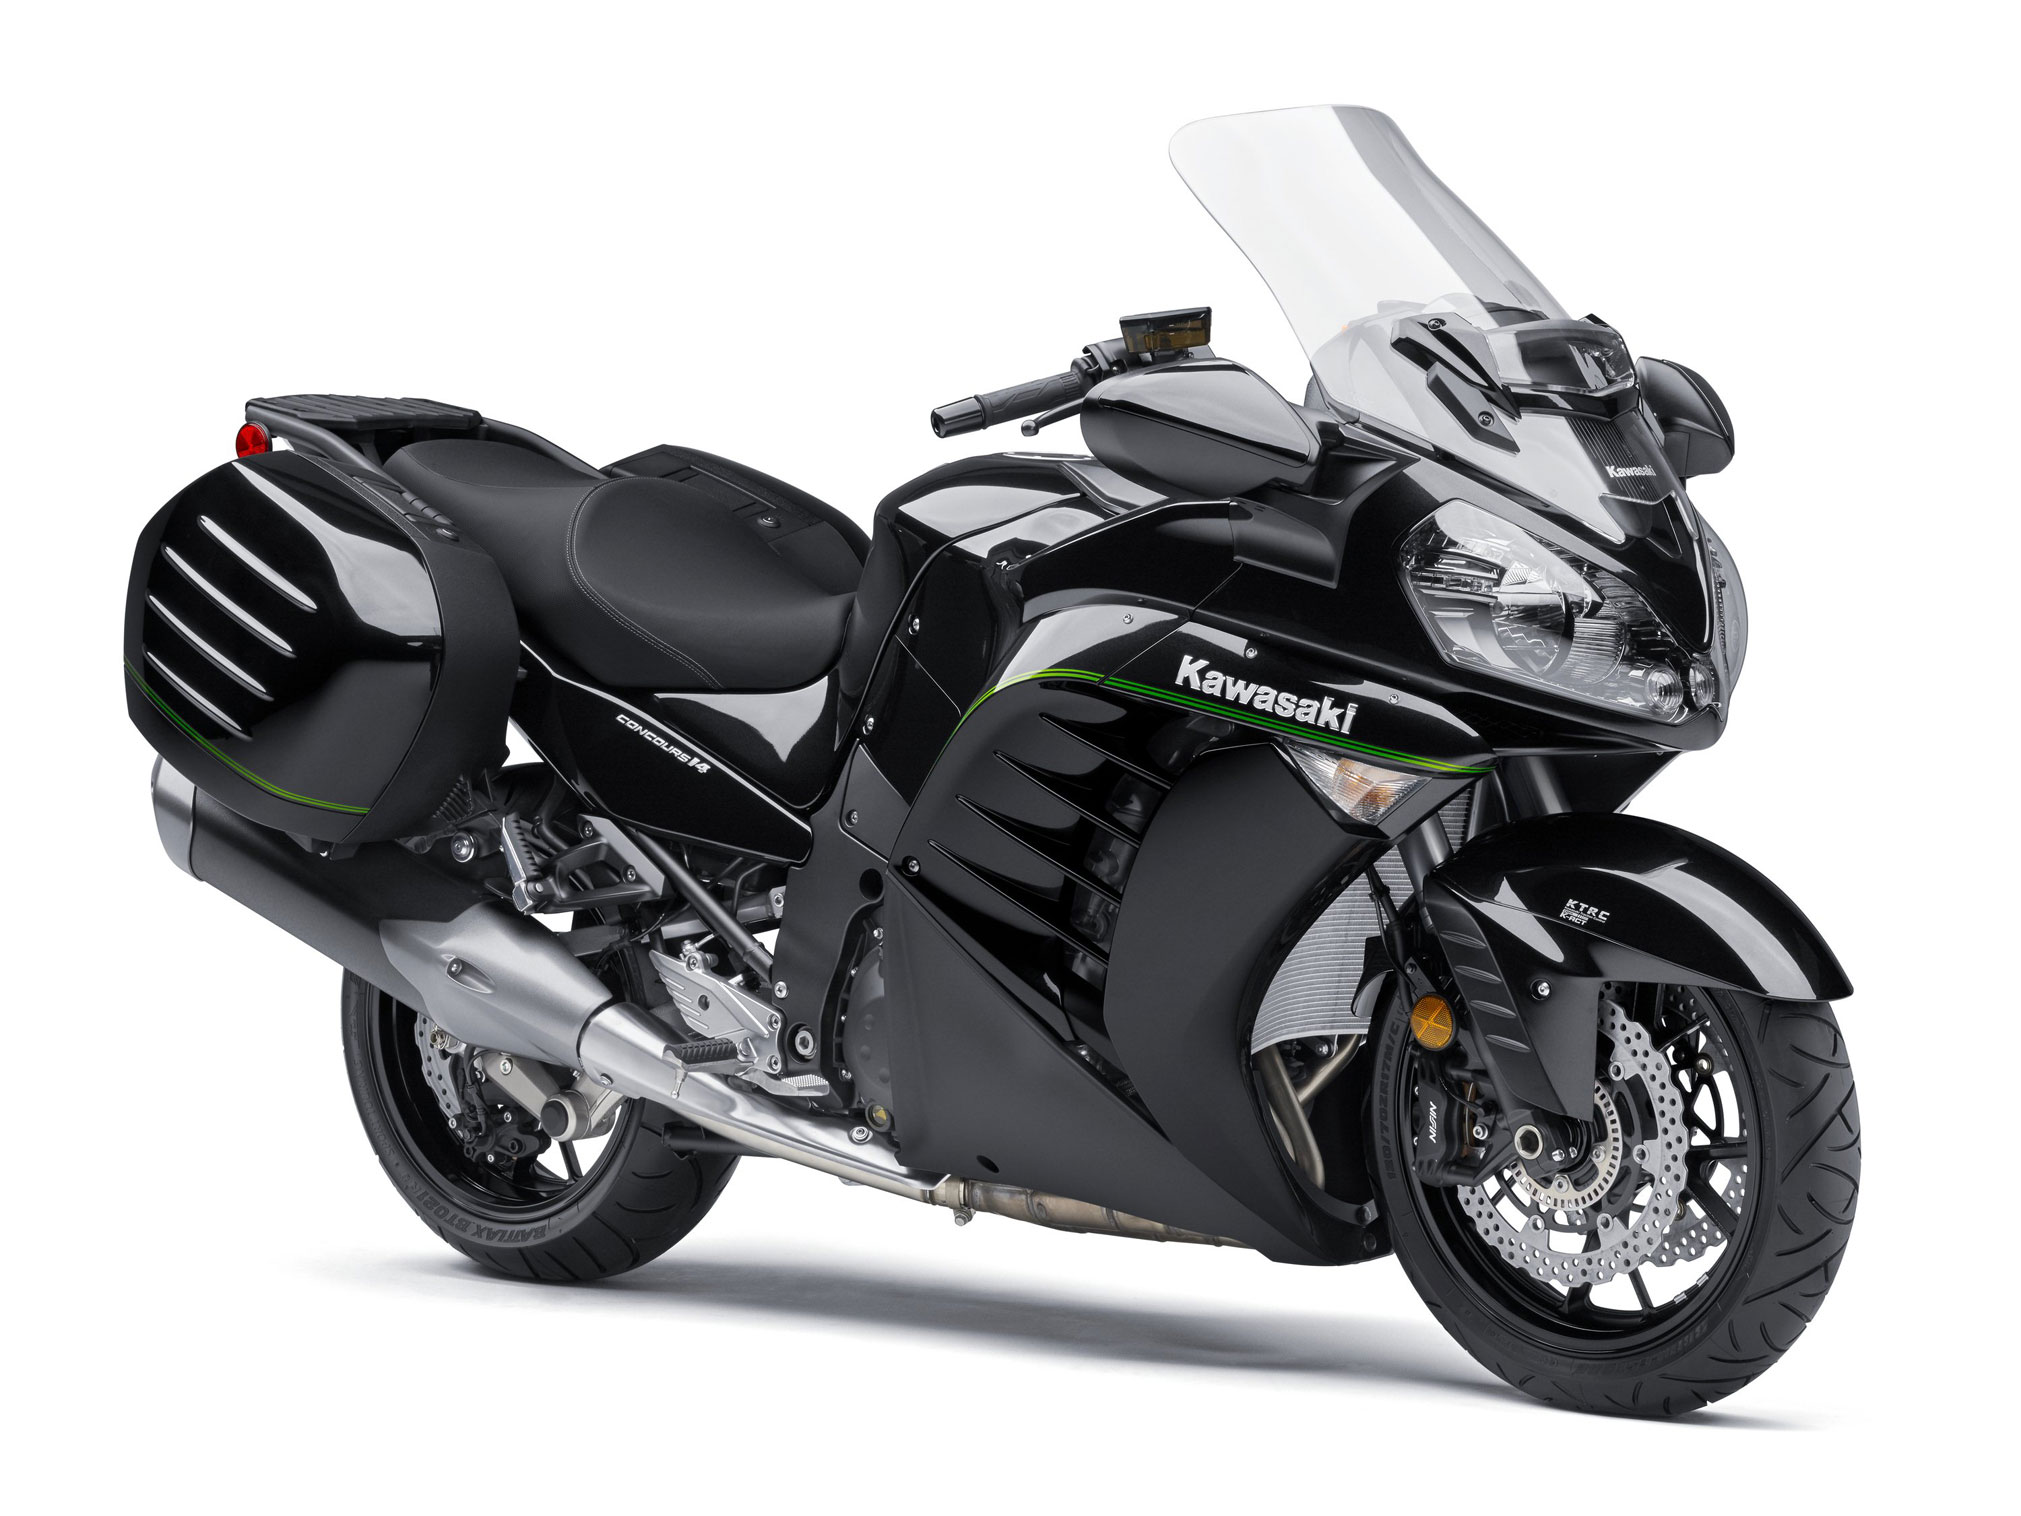 2021 Kawasaki Concours 14 ABS Guide • Total Motorcycle